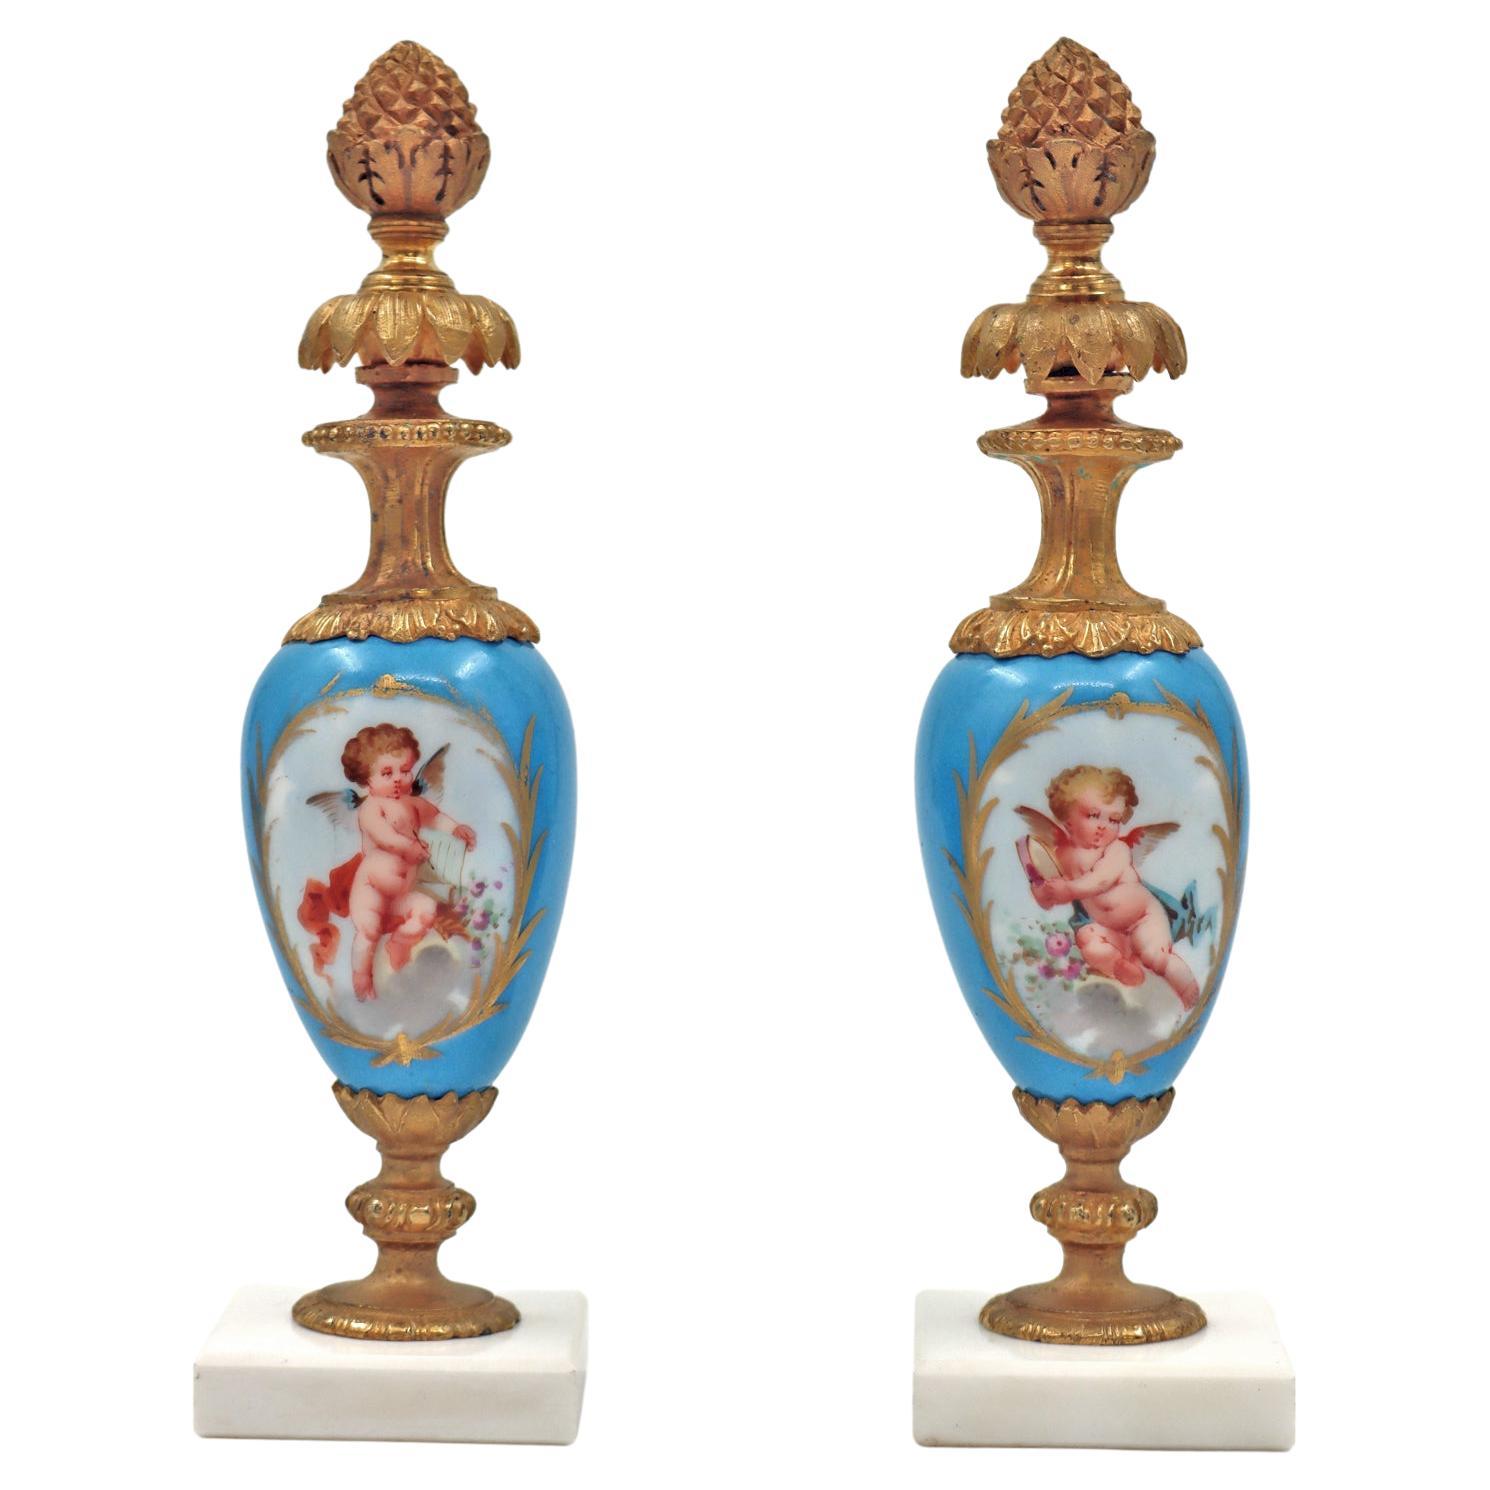 Small Decorations in Sèvres Porcelain, 19th Century